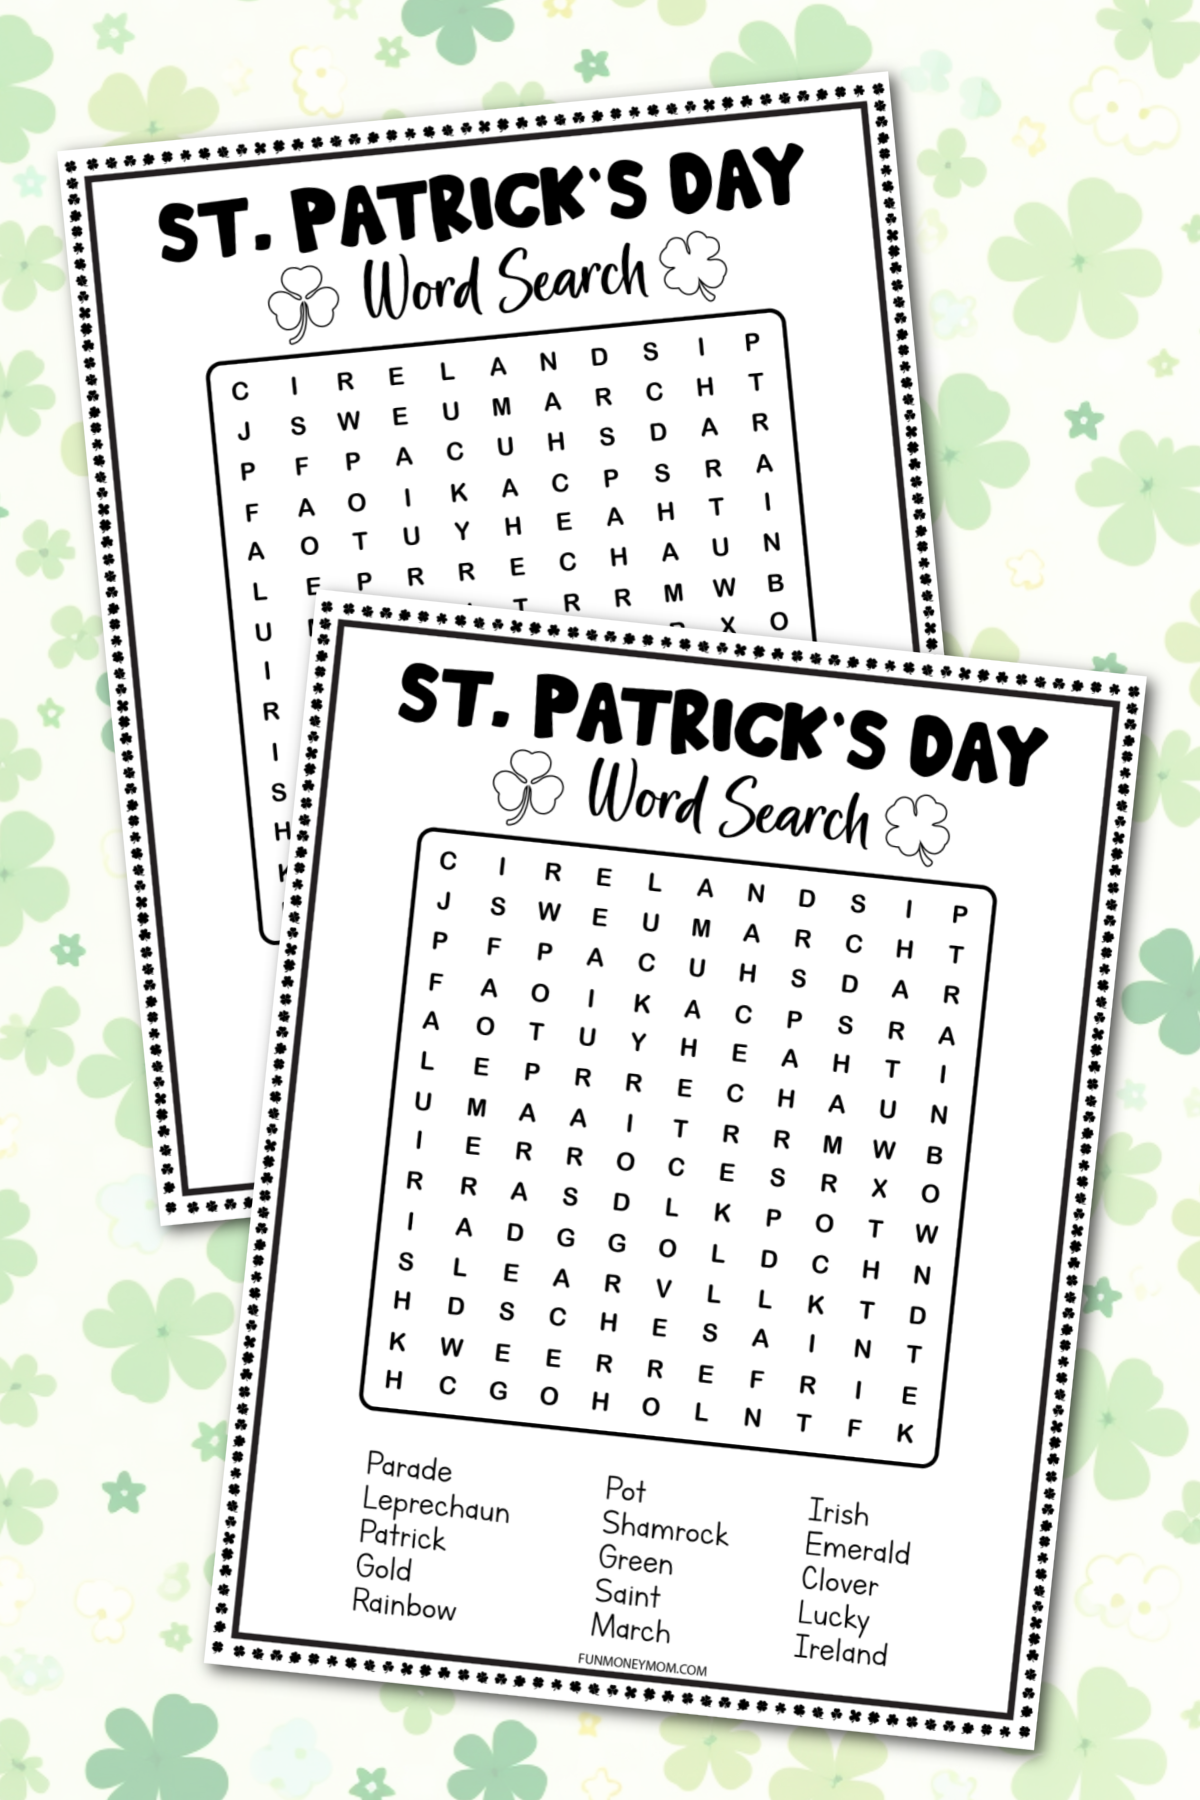 Two st patrick's day word search printables.